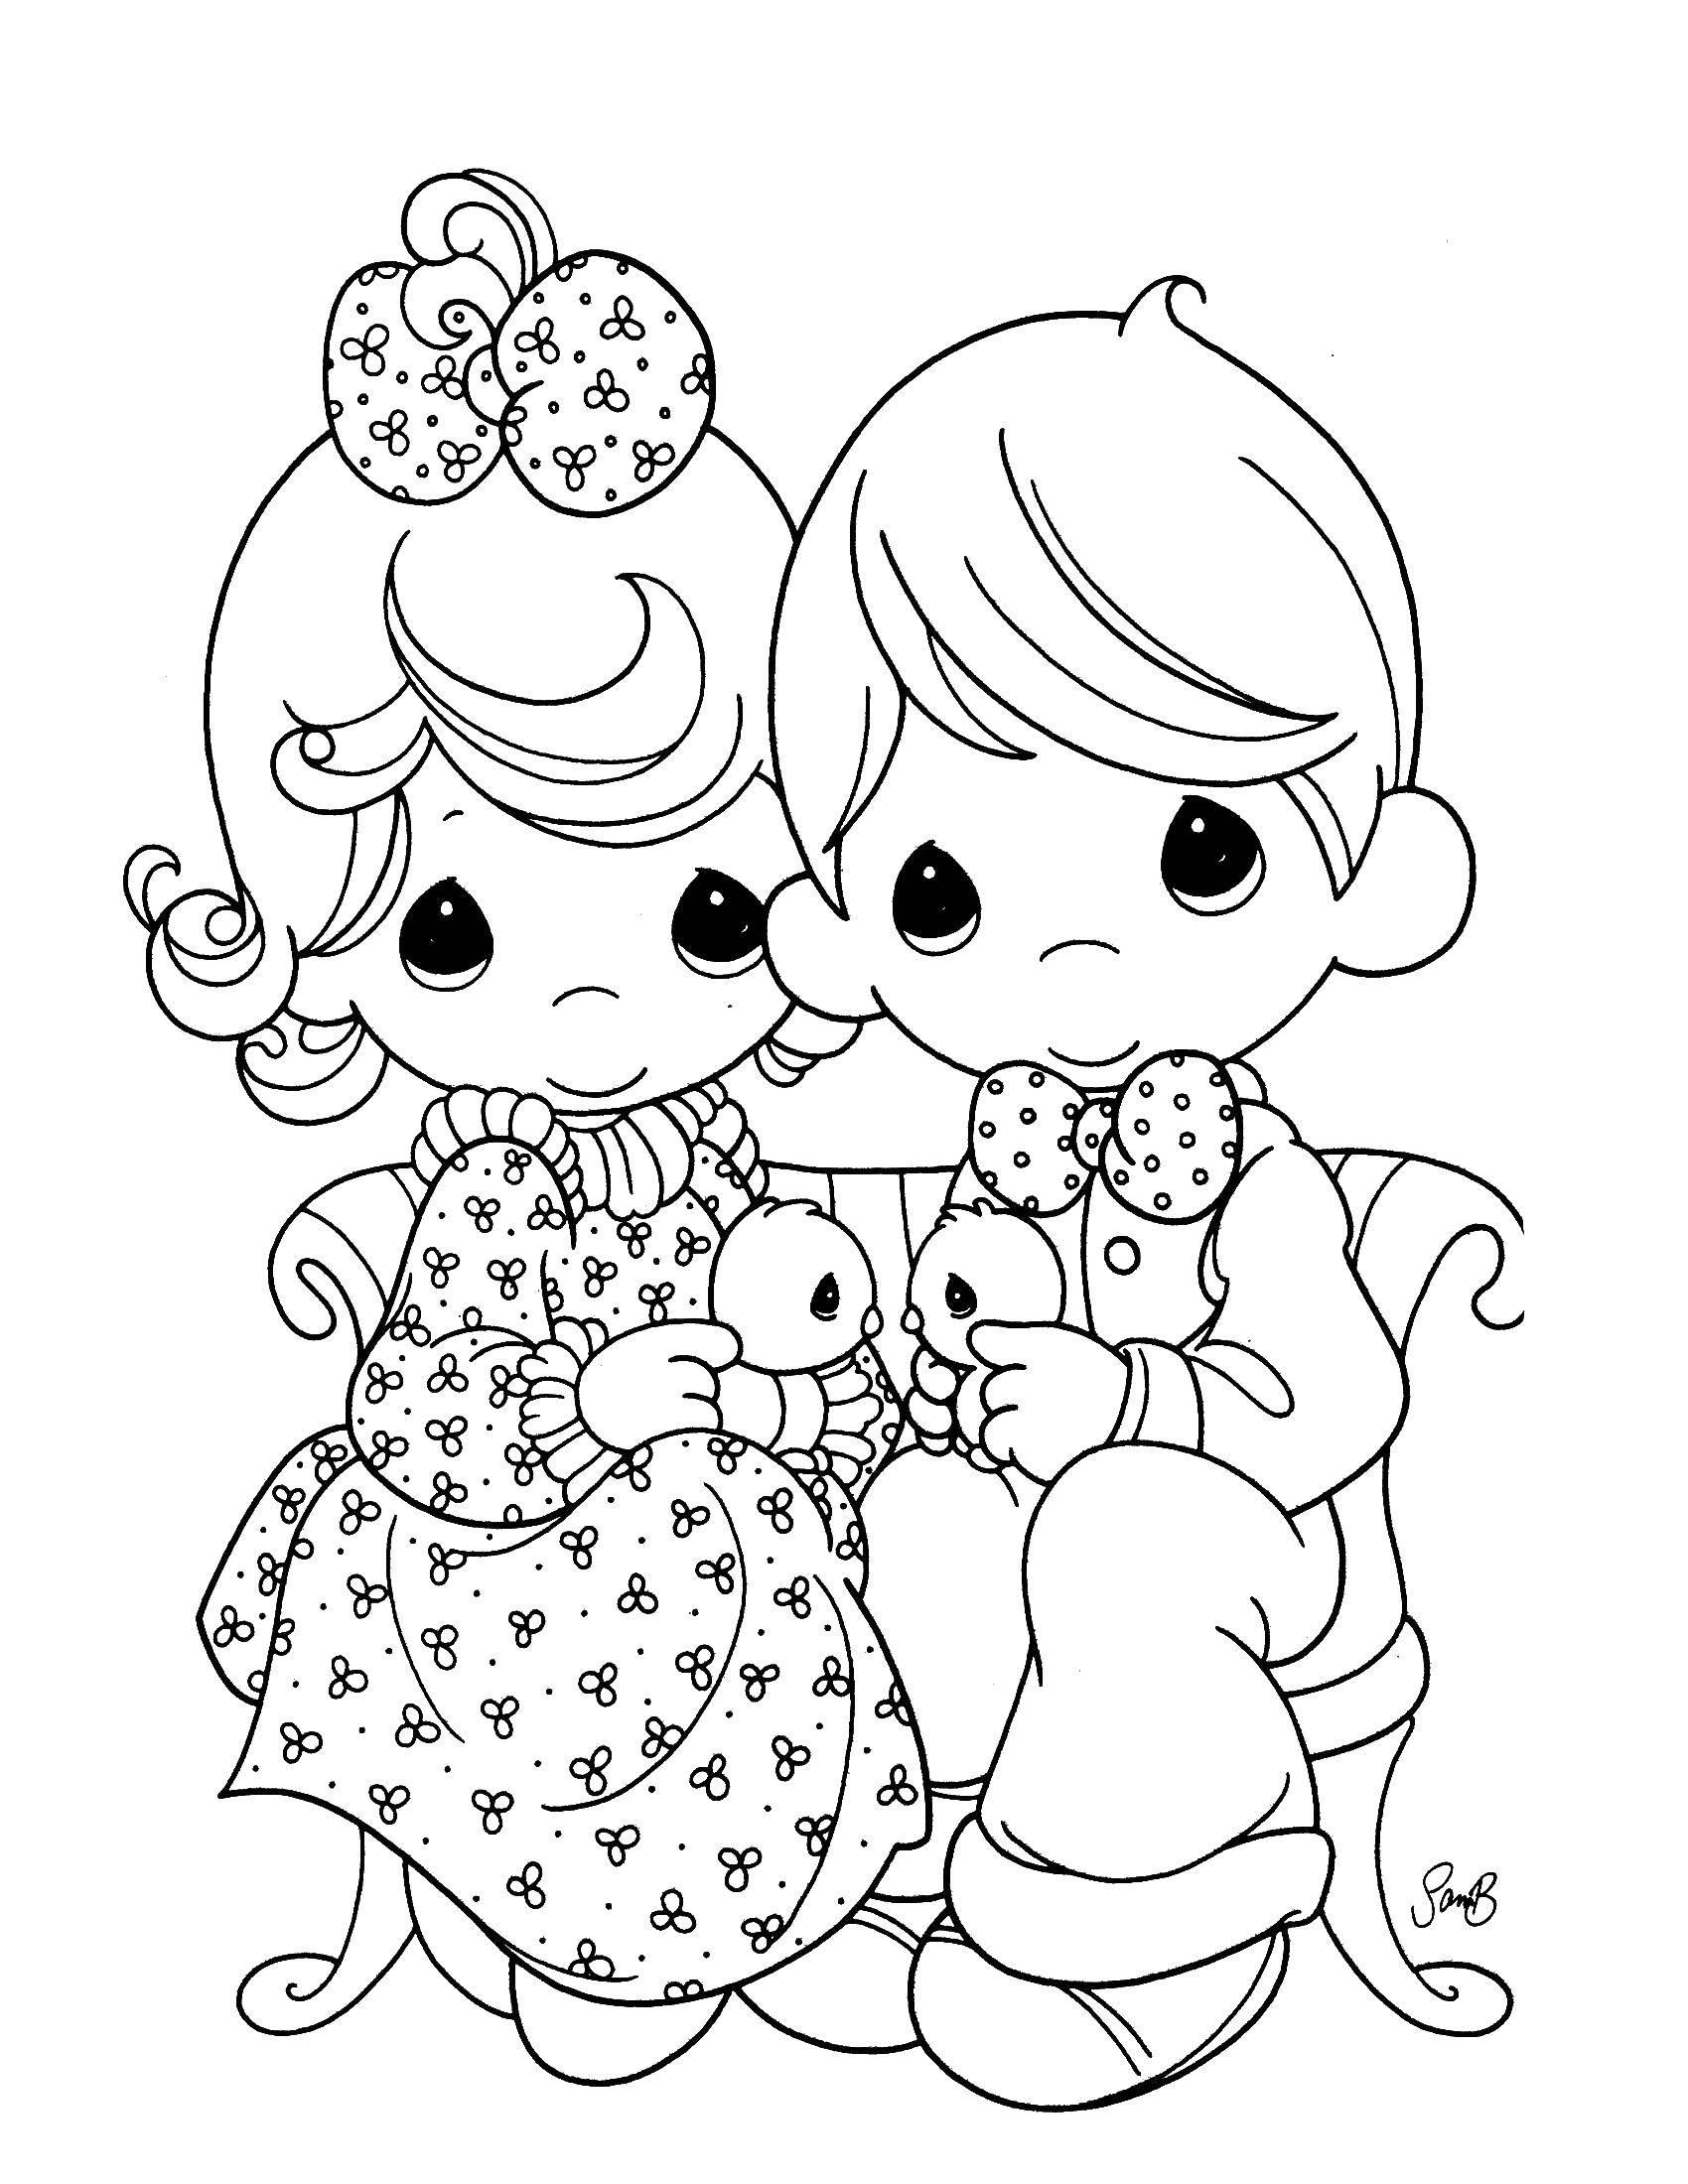 Coloring Little boy and girl with birds. Category Wedding. Tags:  boy, girl, birds.